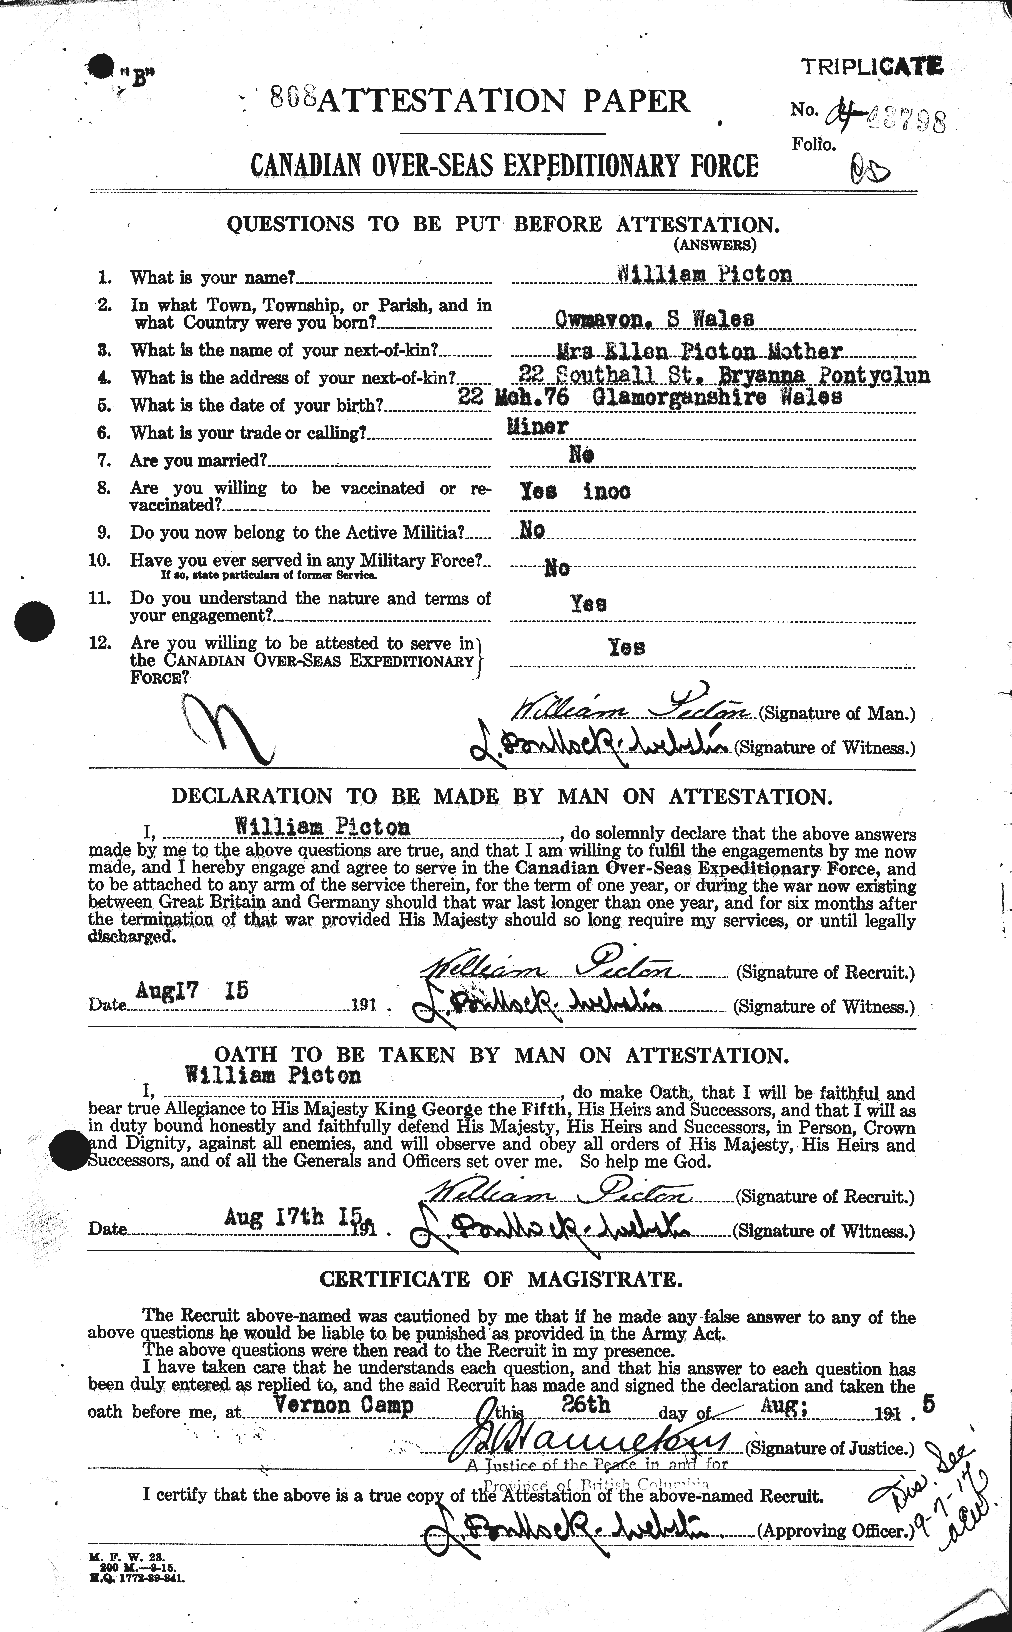 Personnel Records of the First World War - CEF 579813a